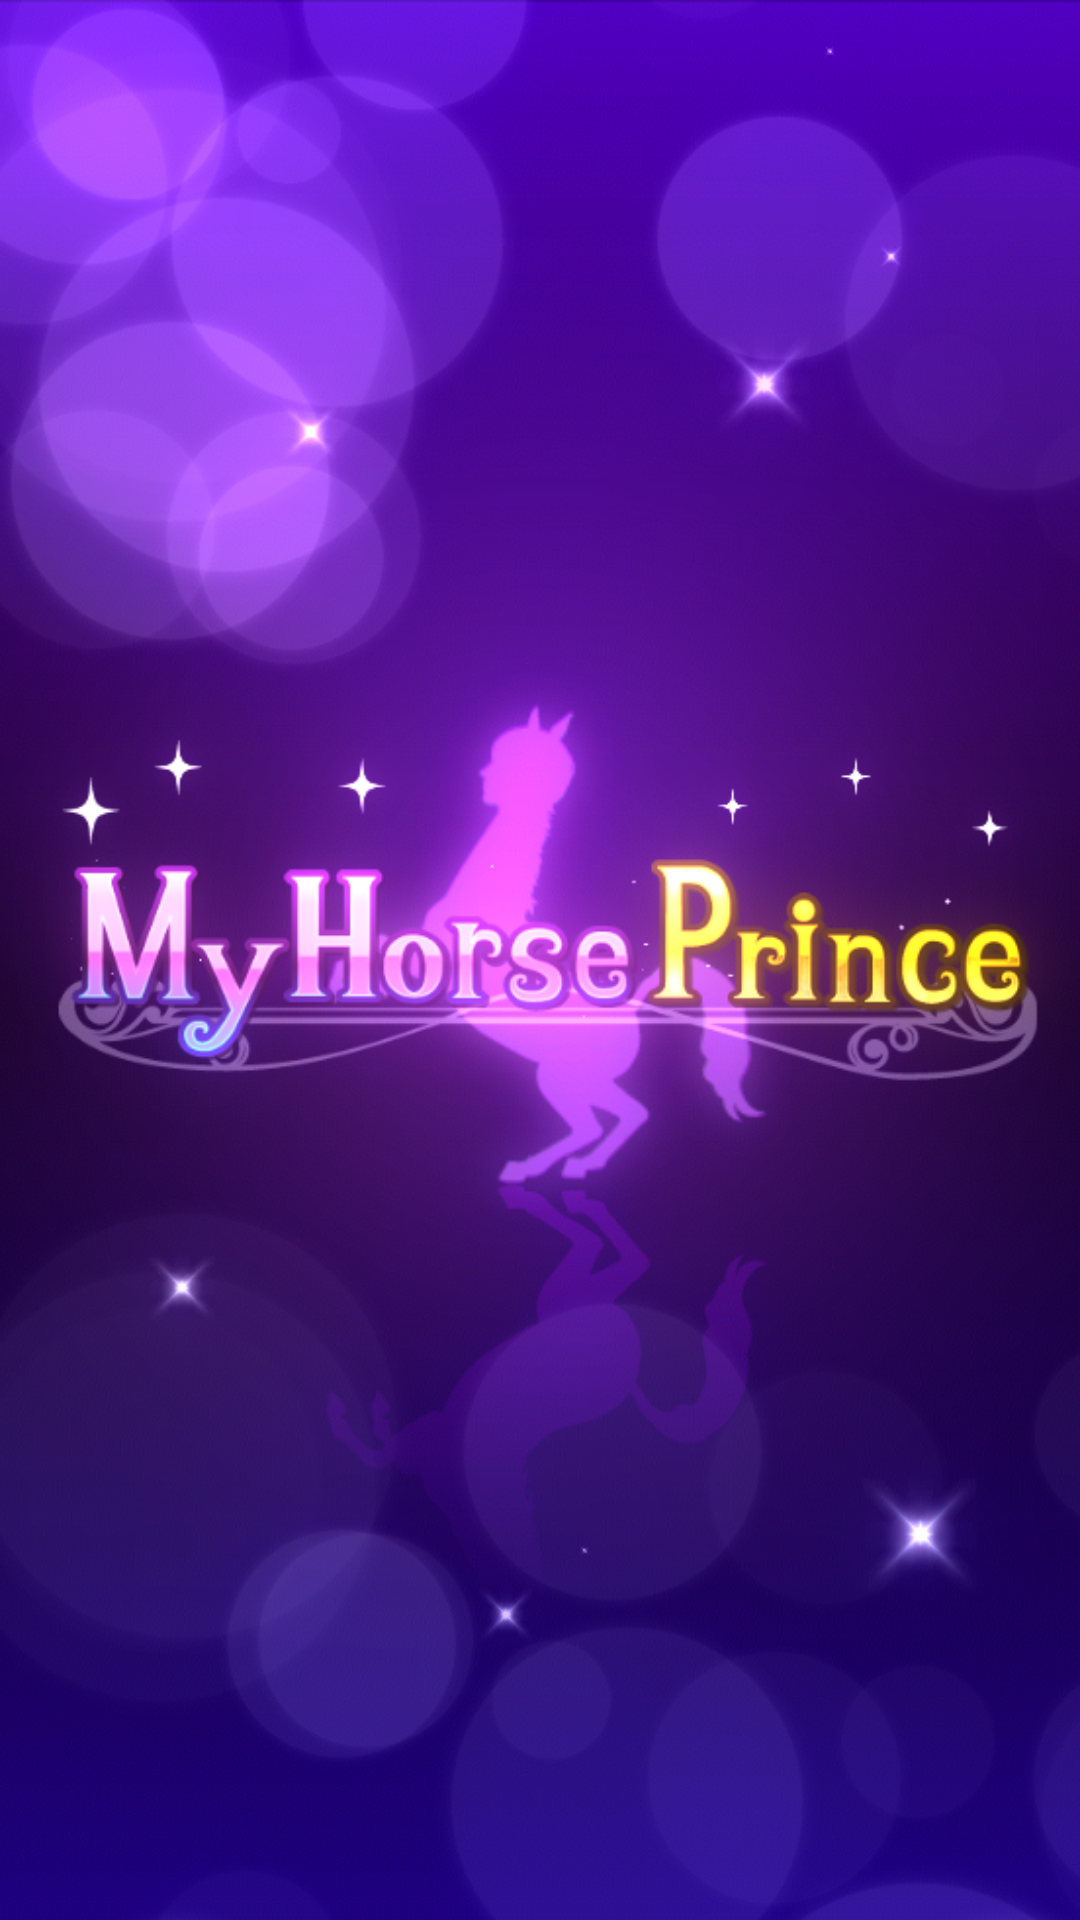 [Smartphone] My Horse Prince Ifht